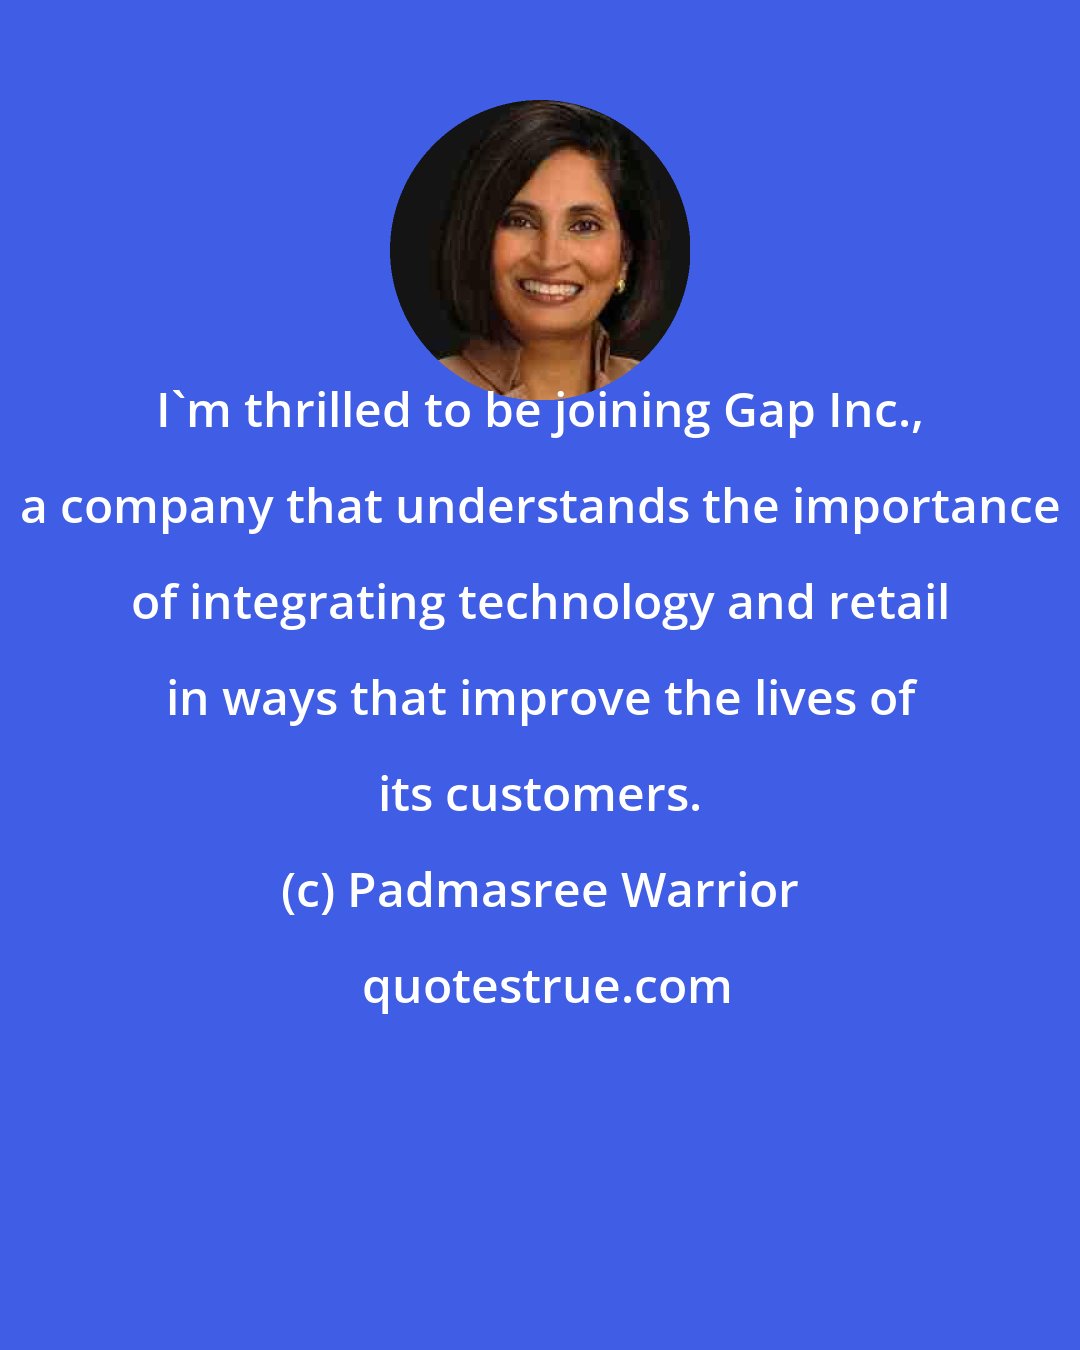 Padmasree Warrior: I'm thrilled to be joining Gap Inc., a company that understands the importance of integrating technology and retail in ways that improve the lives of its customers.